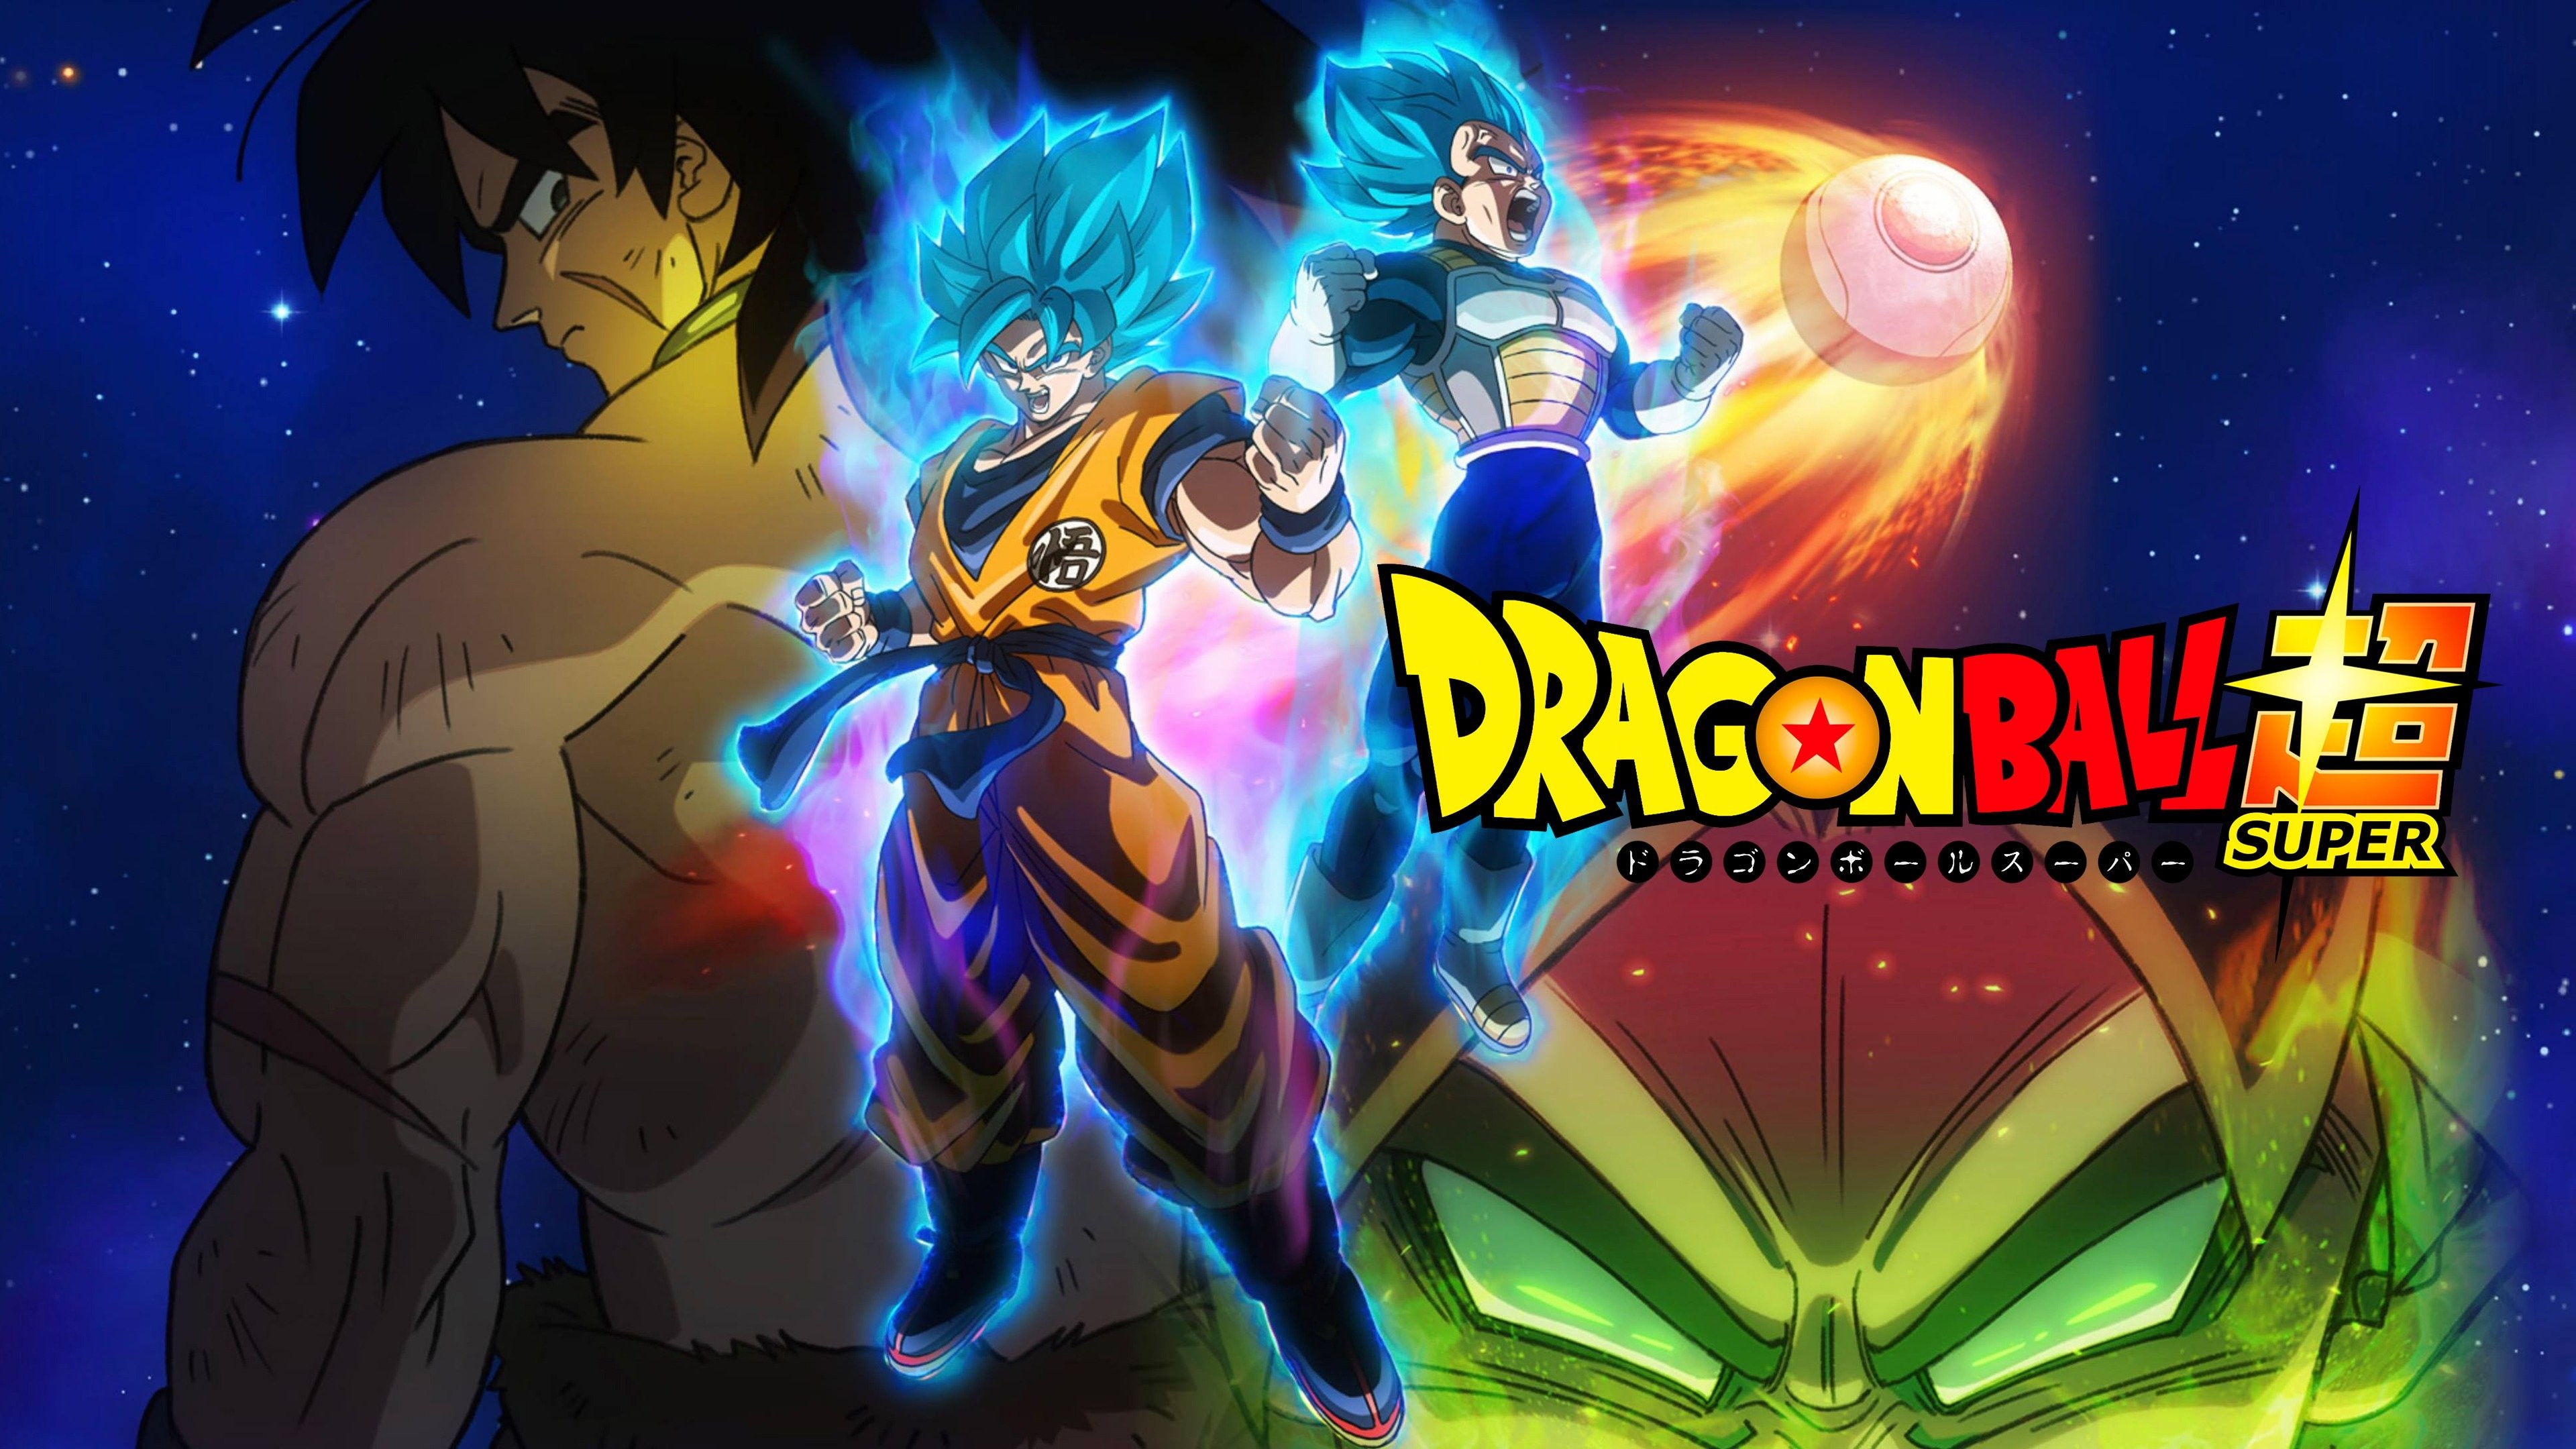 Dragon Ball Super — Episode 93 Review - The Game of Nerds